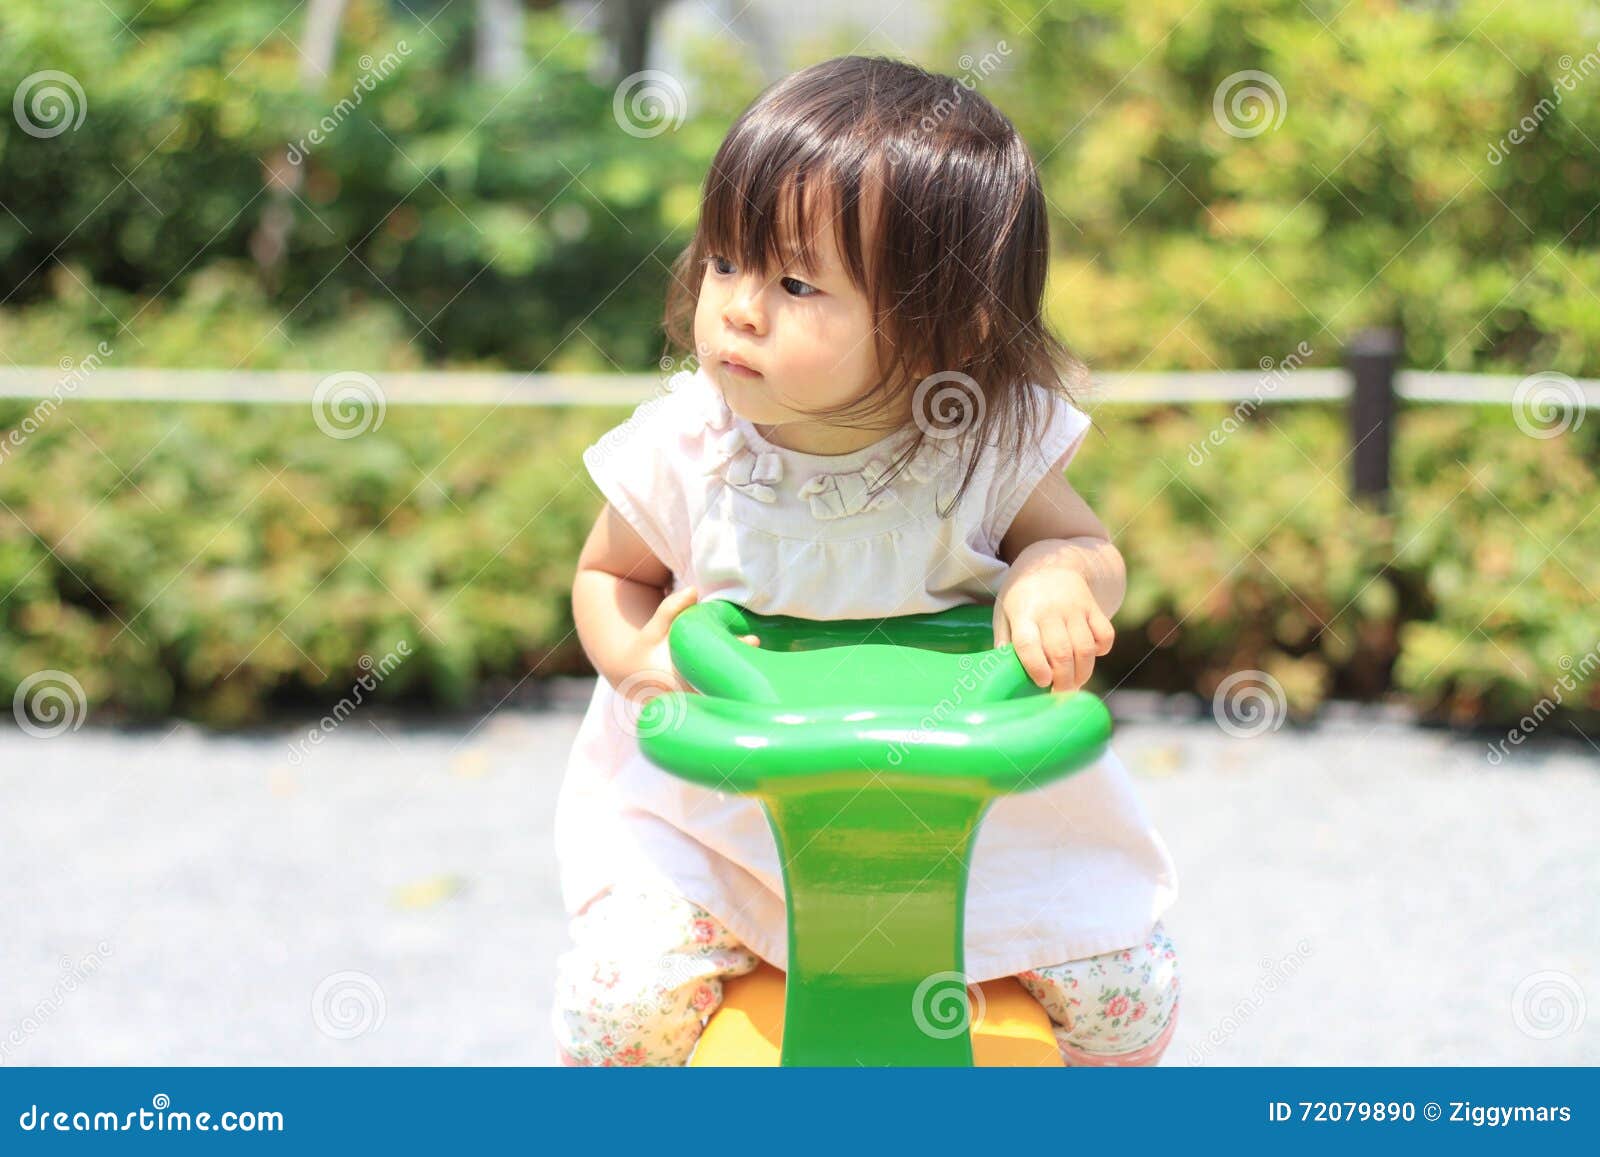 Japanese Girl on the Seesaw Stock Photo - Image of teeter, year: 72079890